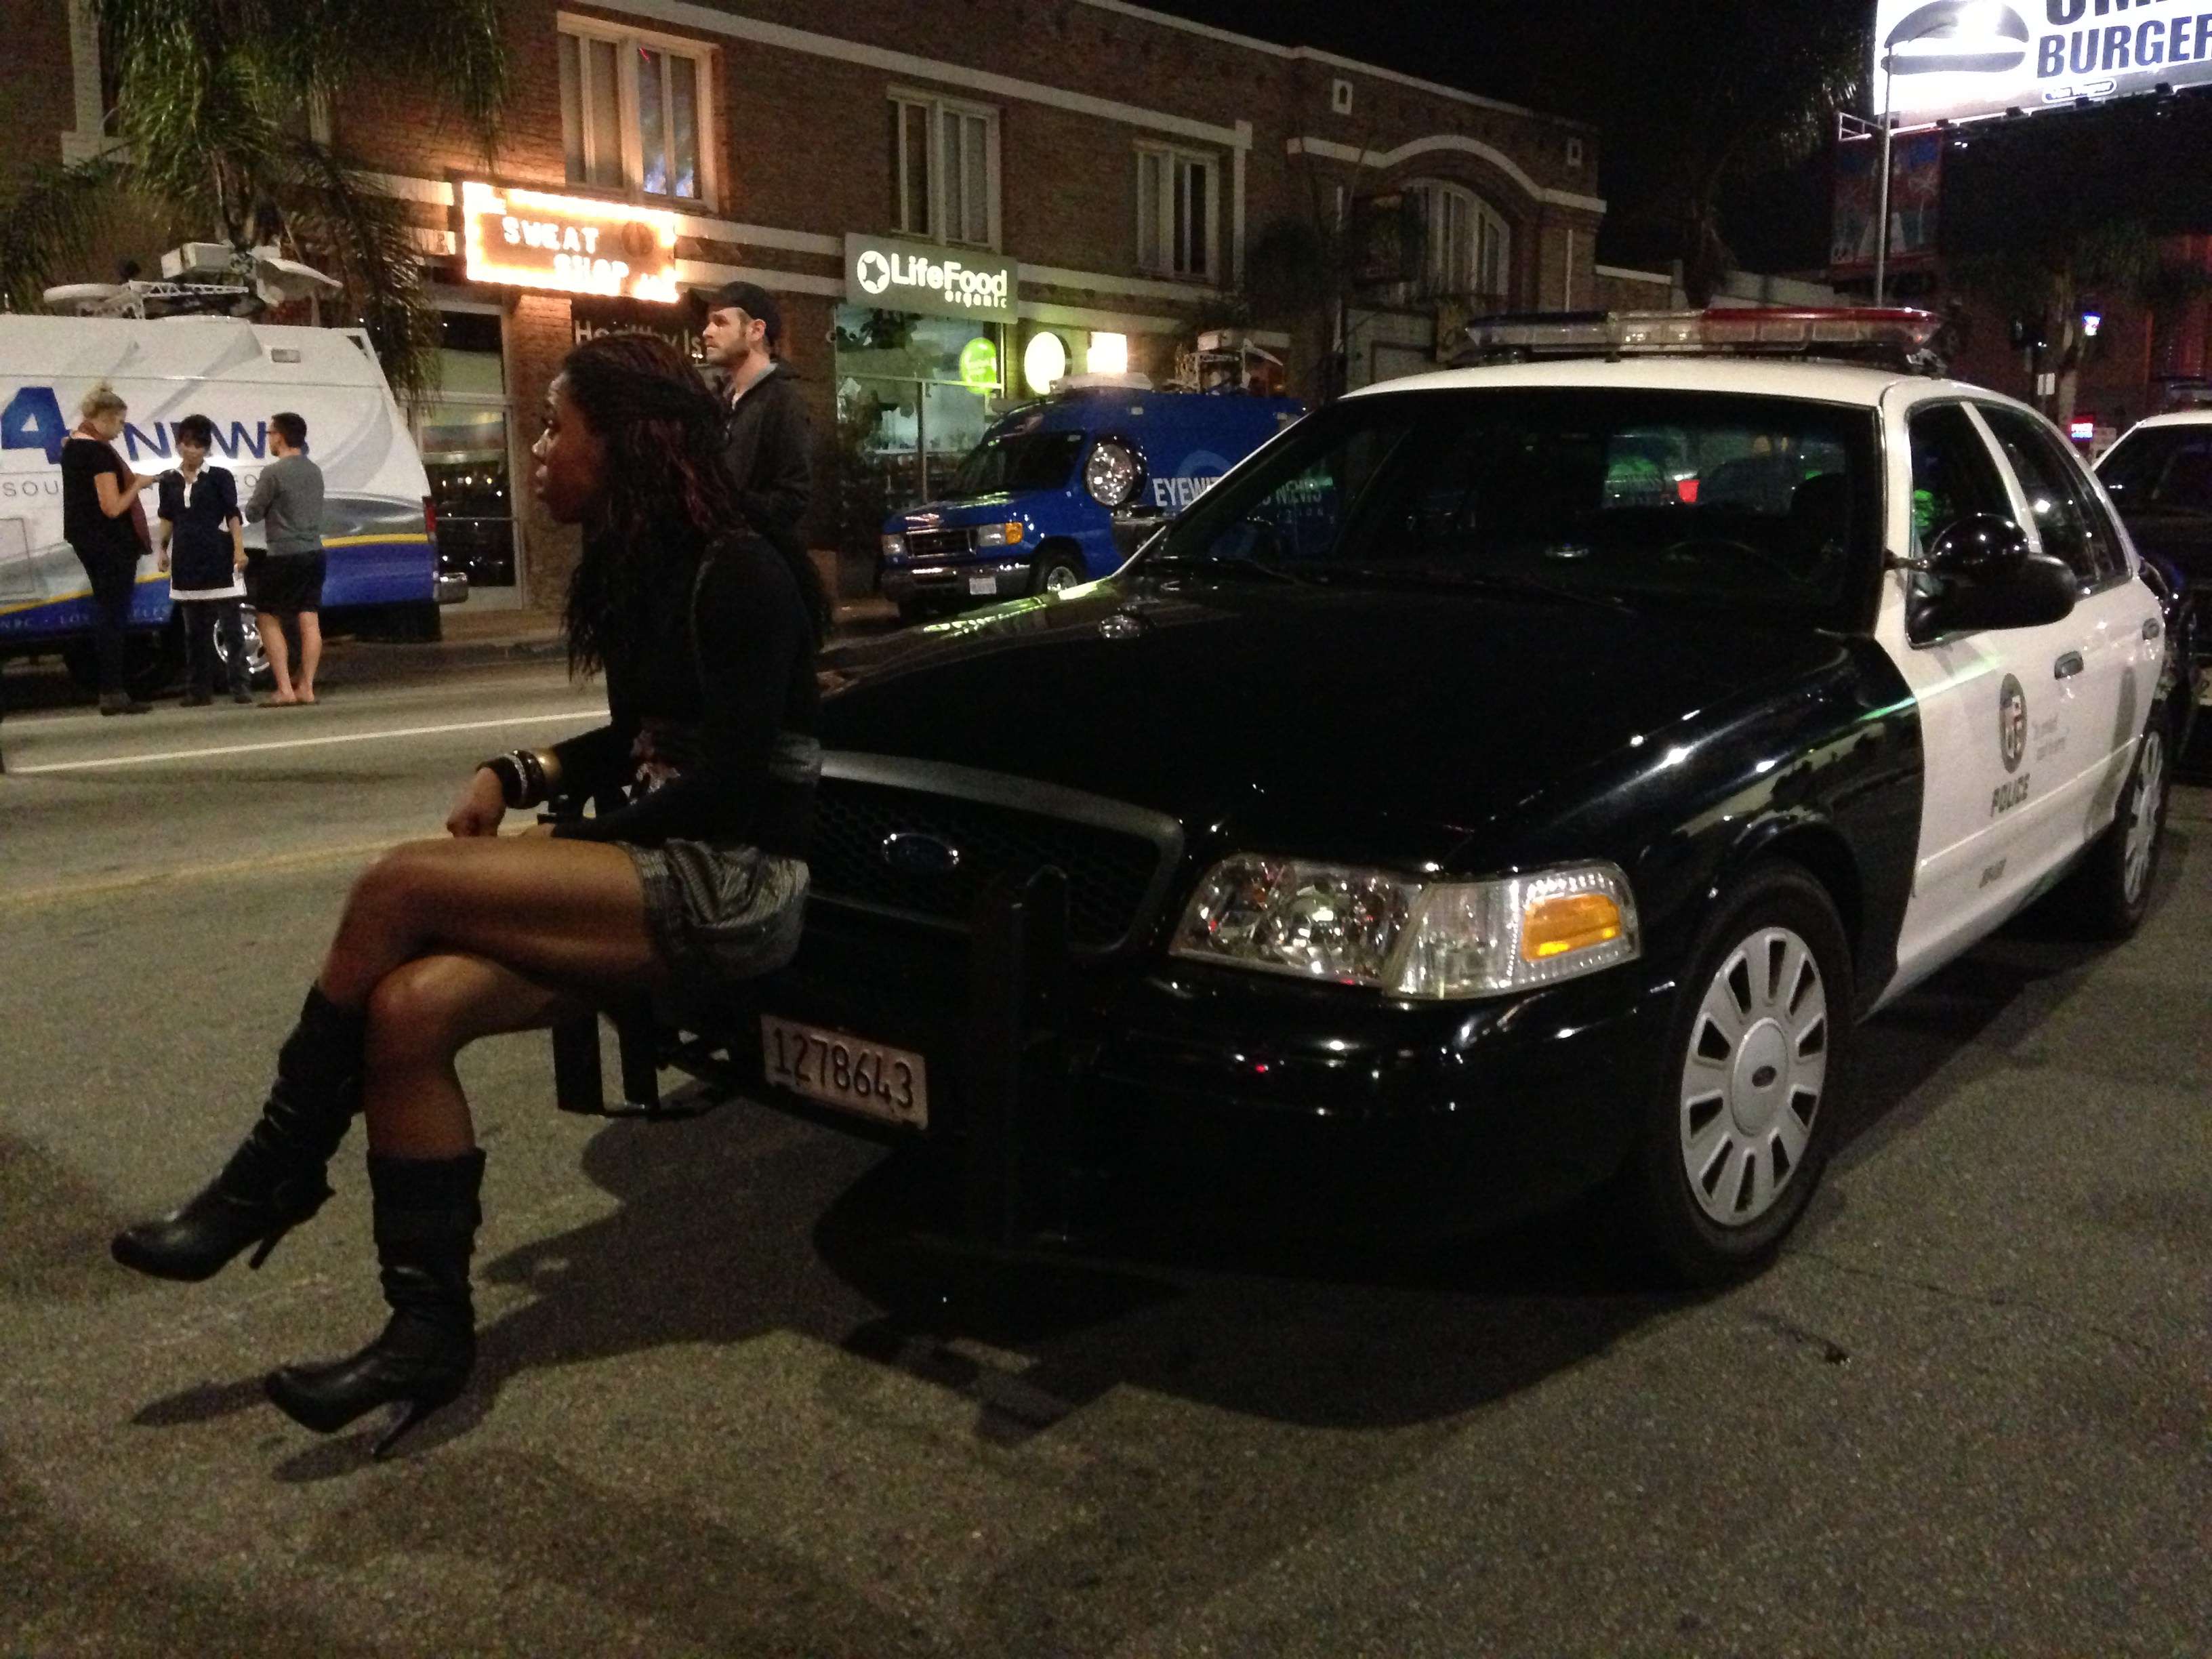 Woman sits on front of LAPD squad car watching protestors July 15, 2013.